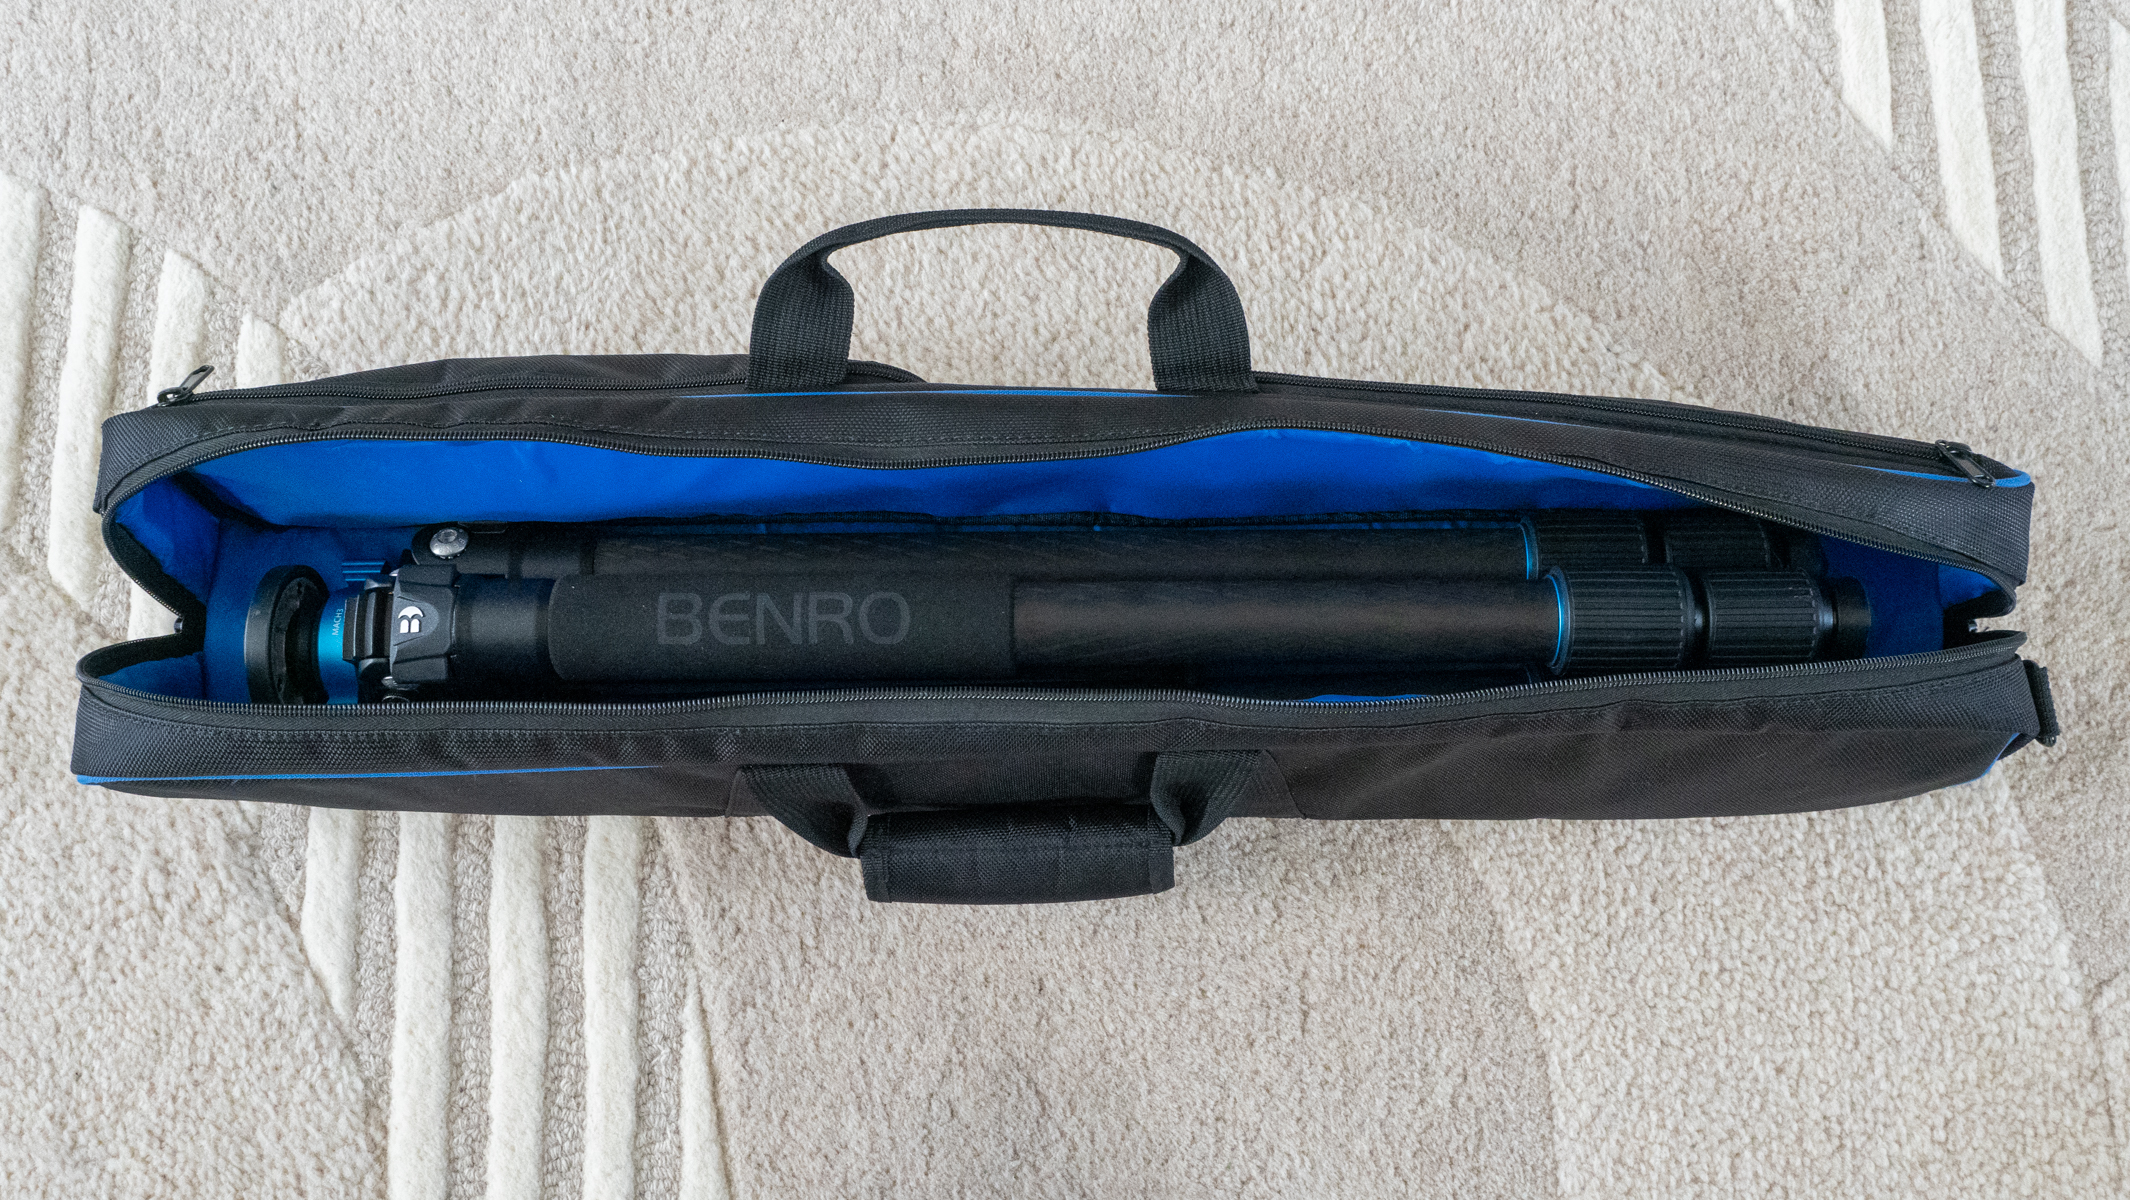 Benro Mach3 in carrying case